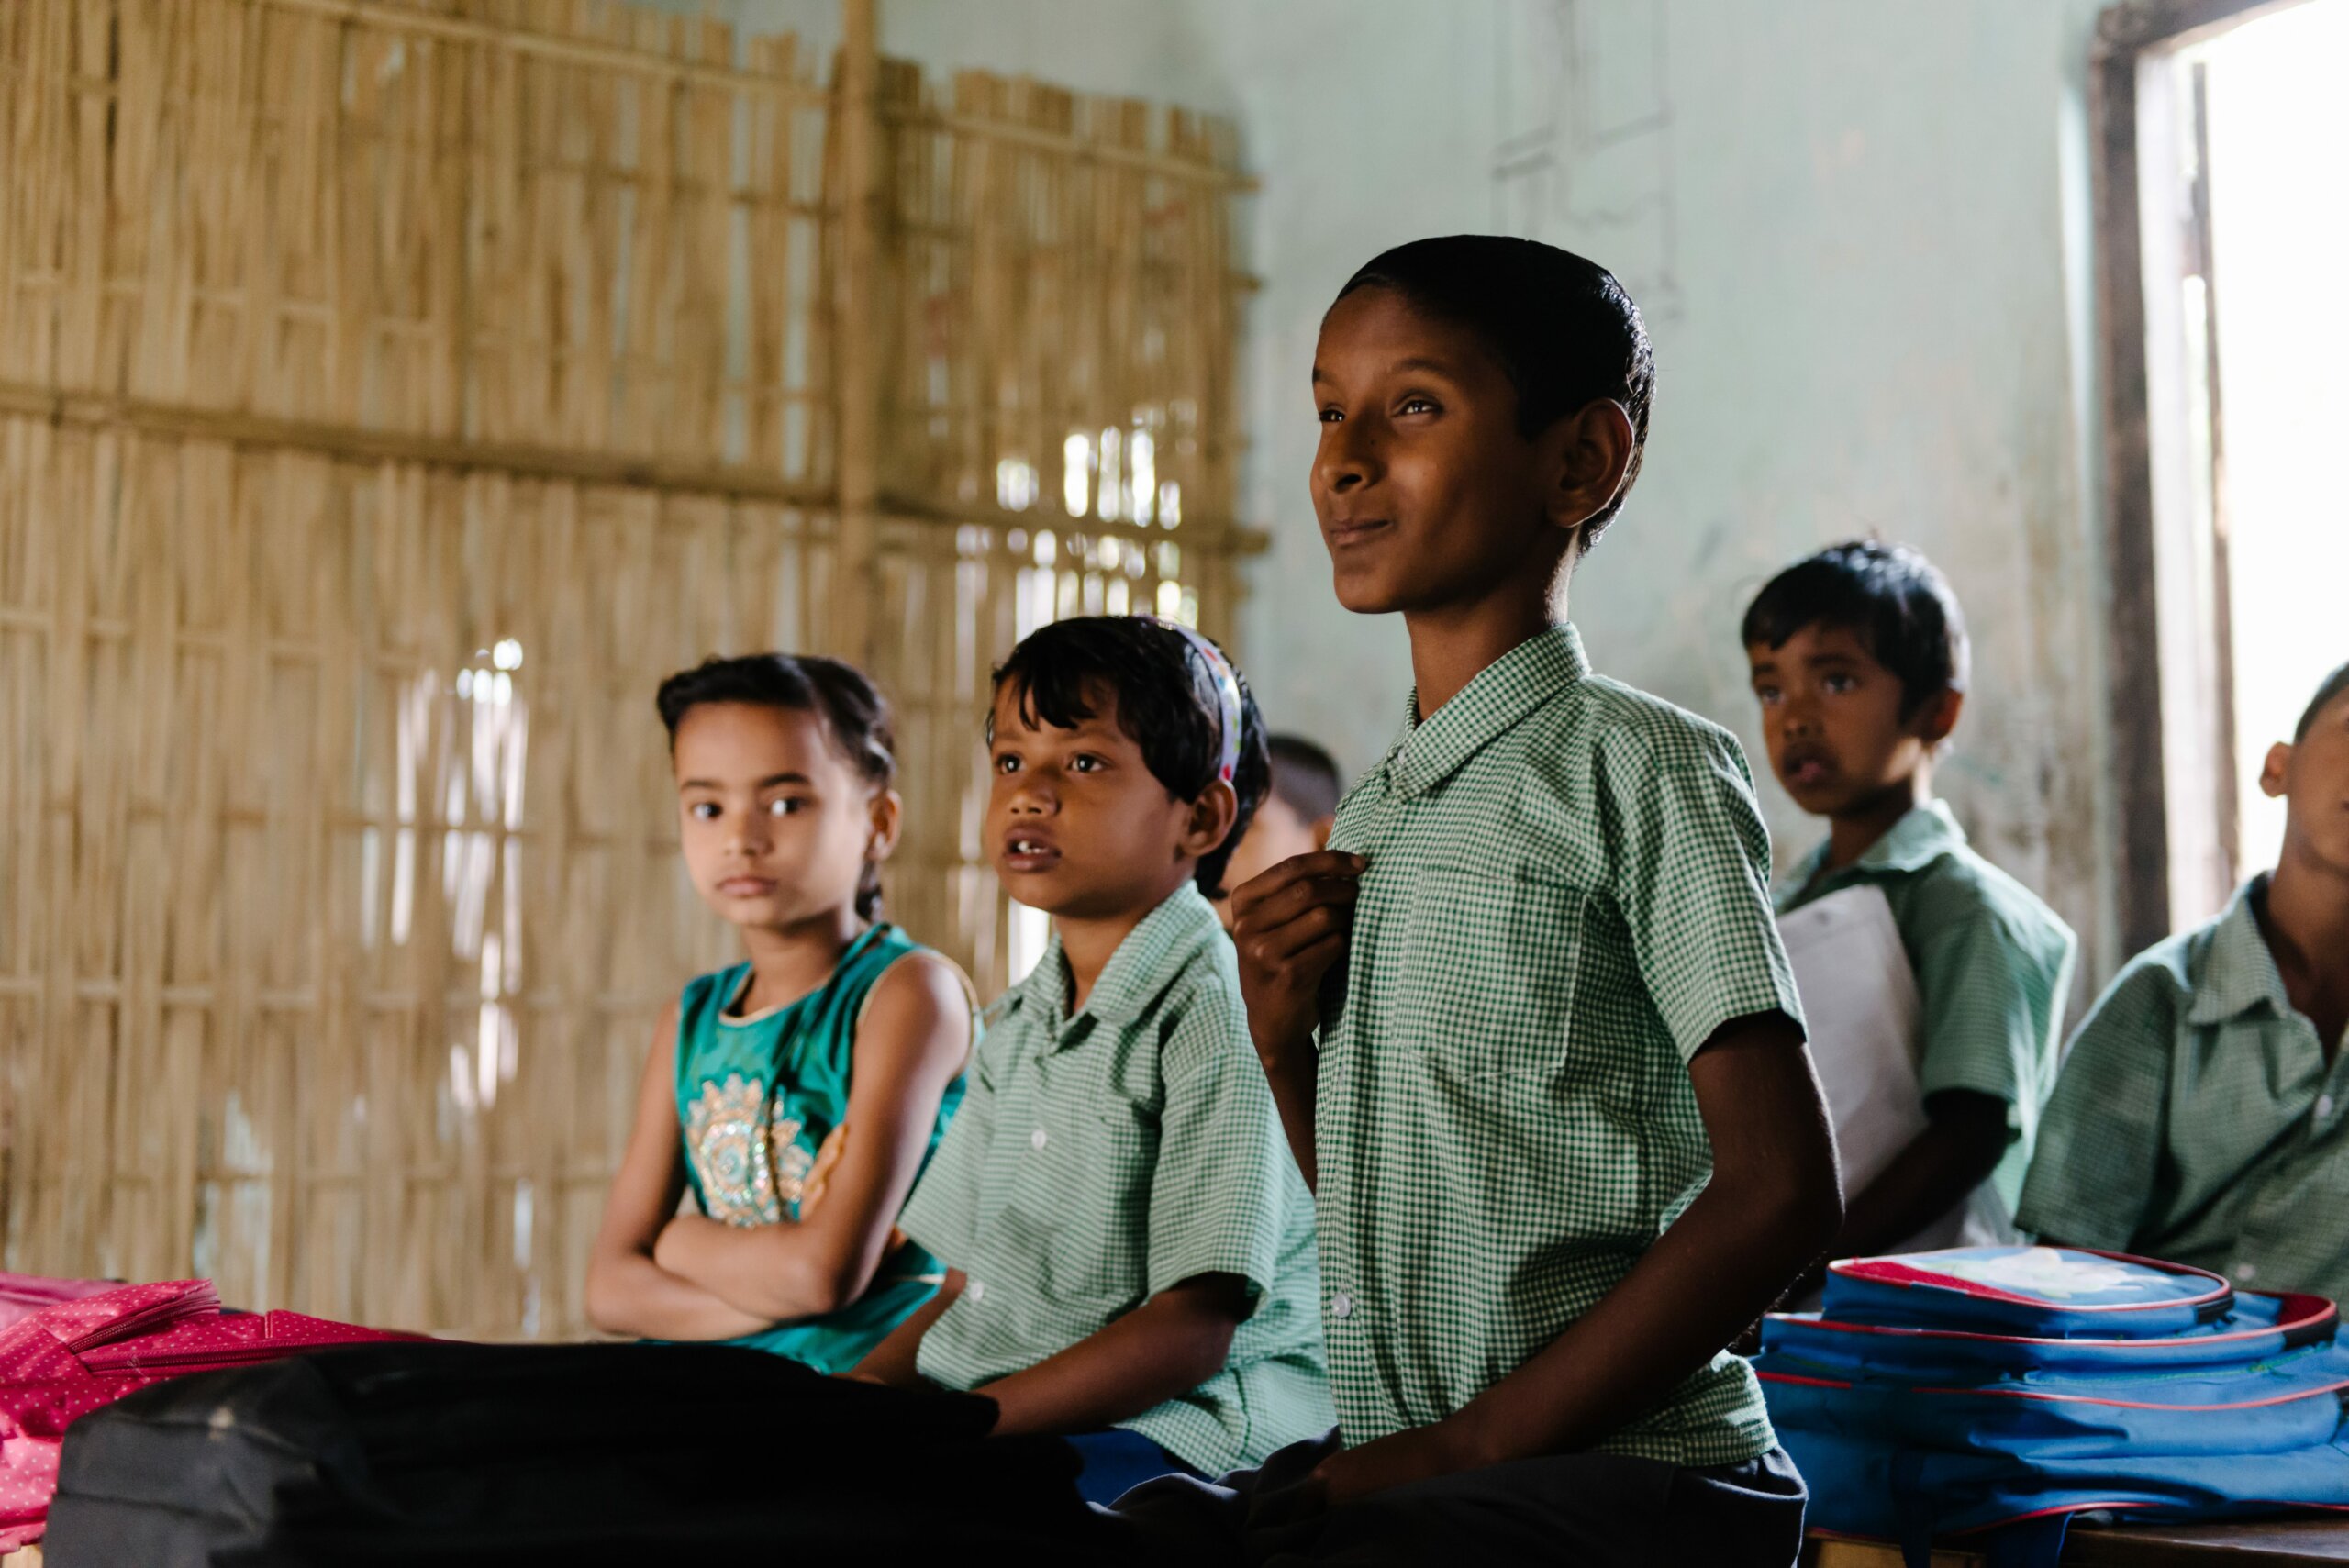 Naresh sits in a school classroom listening to the teacher